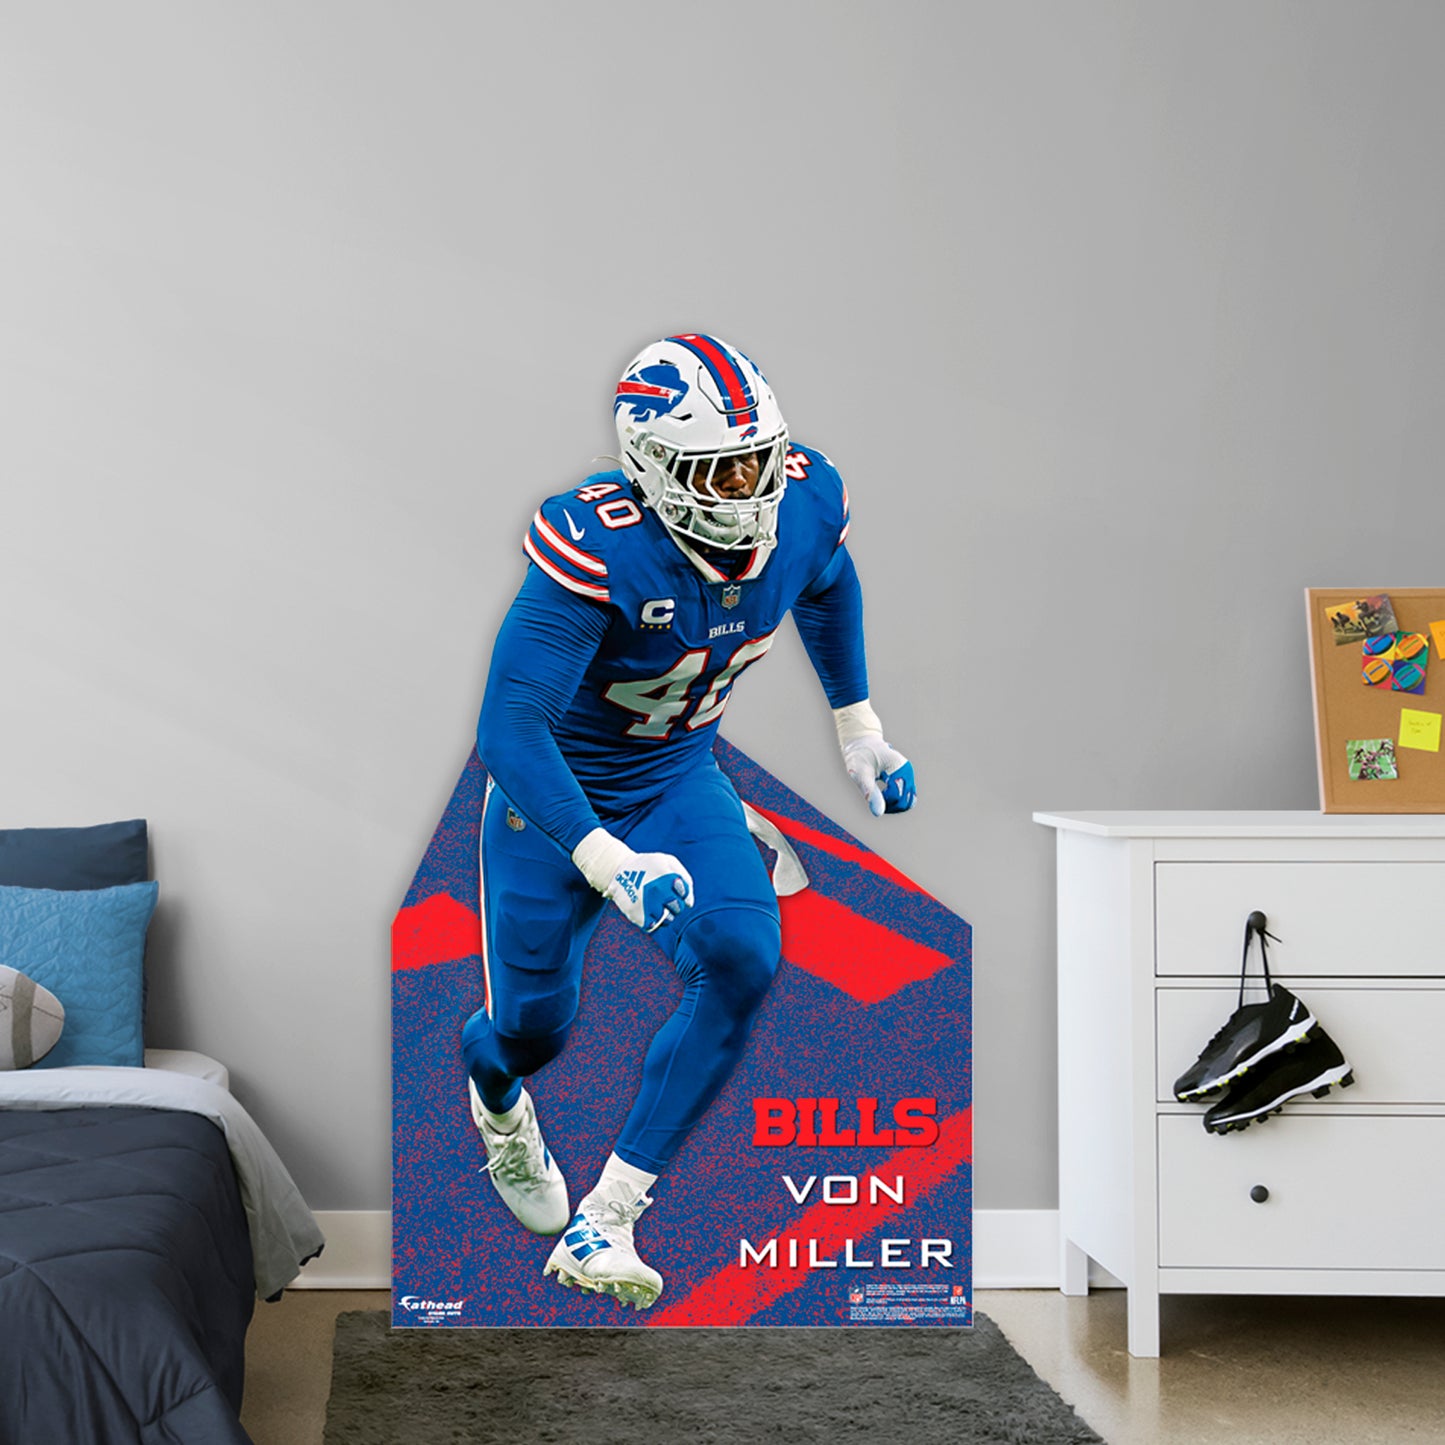 Buffalo Bills: Von Miller   Life-Size   Foam Core Cutout  - Officially Licensed NFL    Stand Out